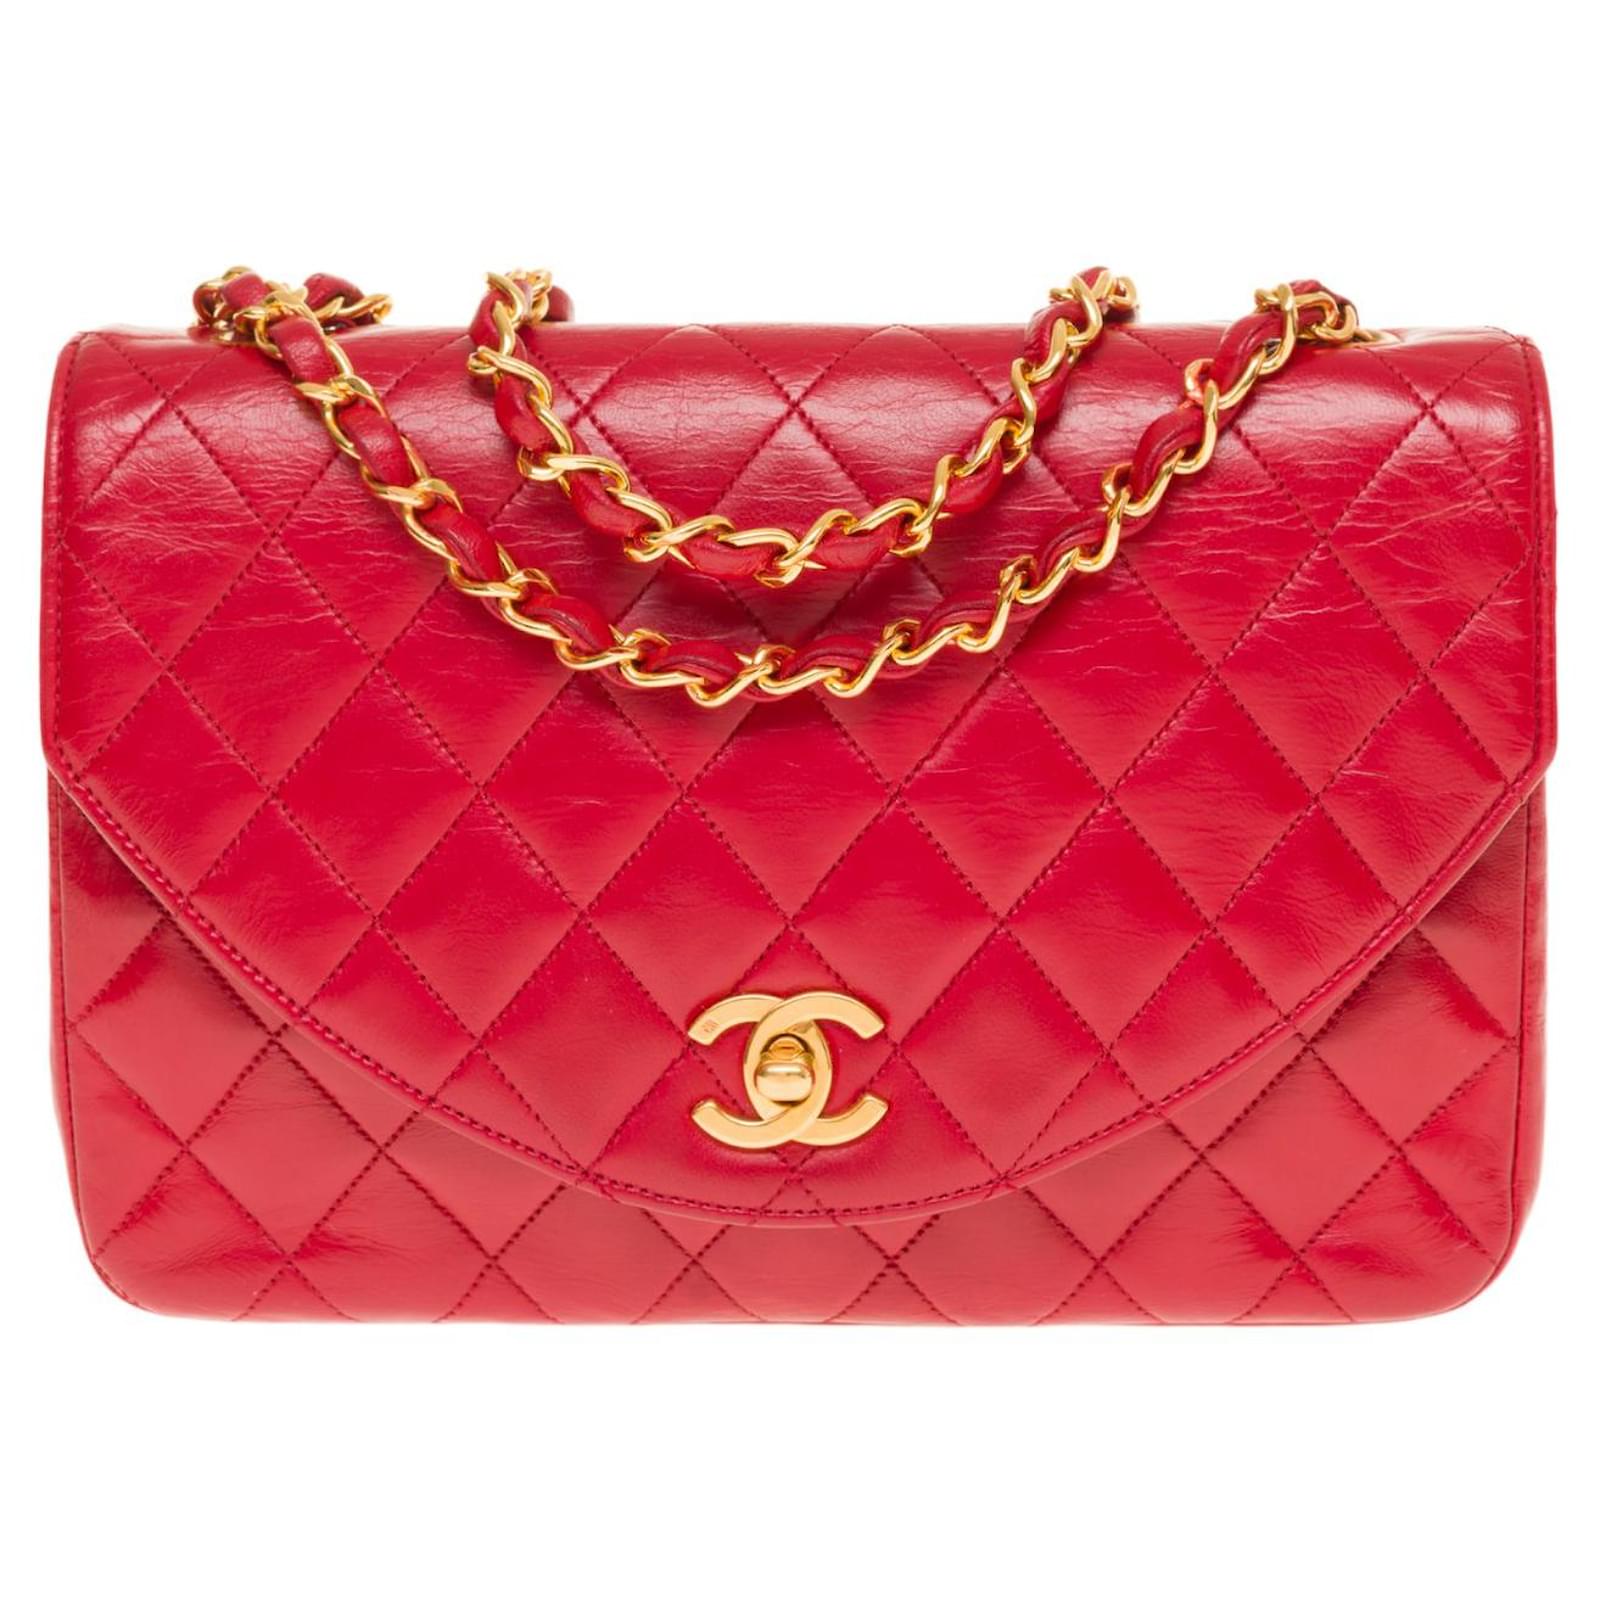 Timeless/classique chain leather backpack Chanel Red in Leather